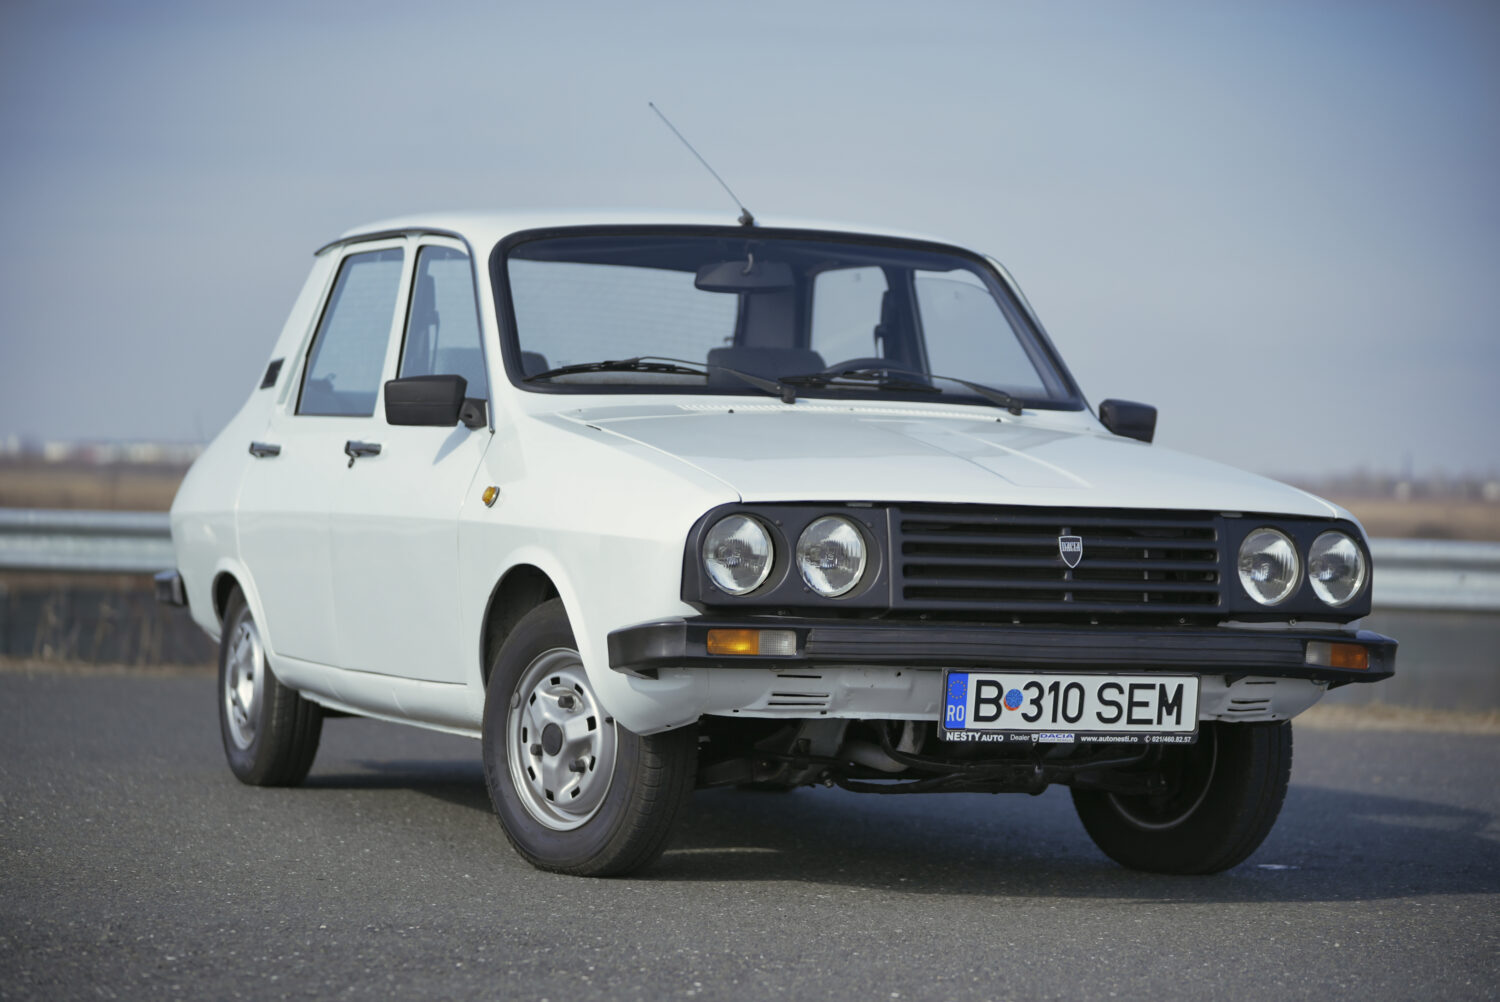 2022 - Story Dacia - Dacia 1300: The car that started it all